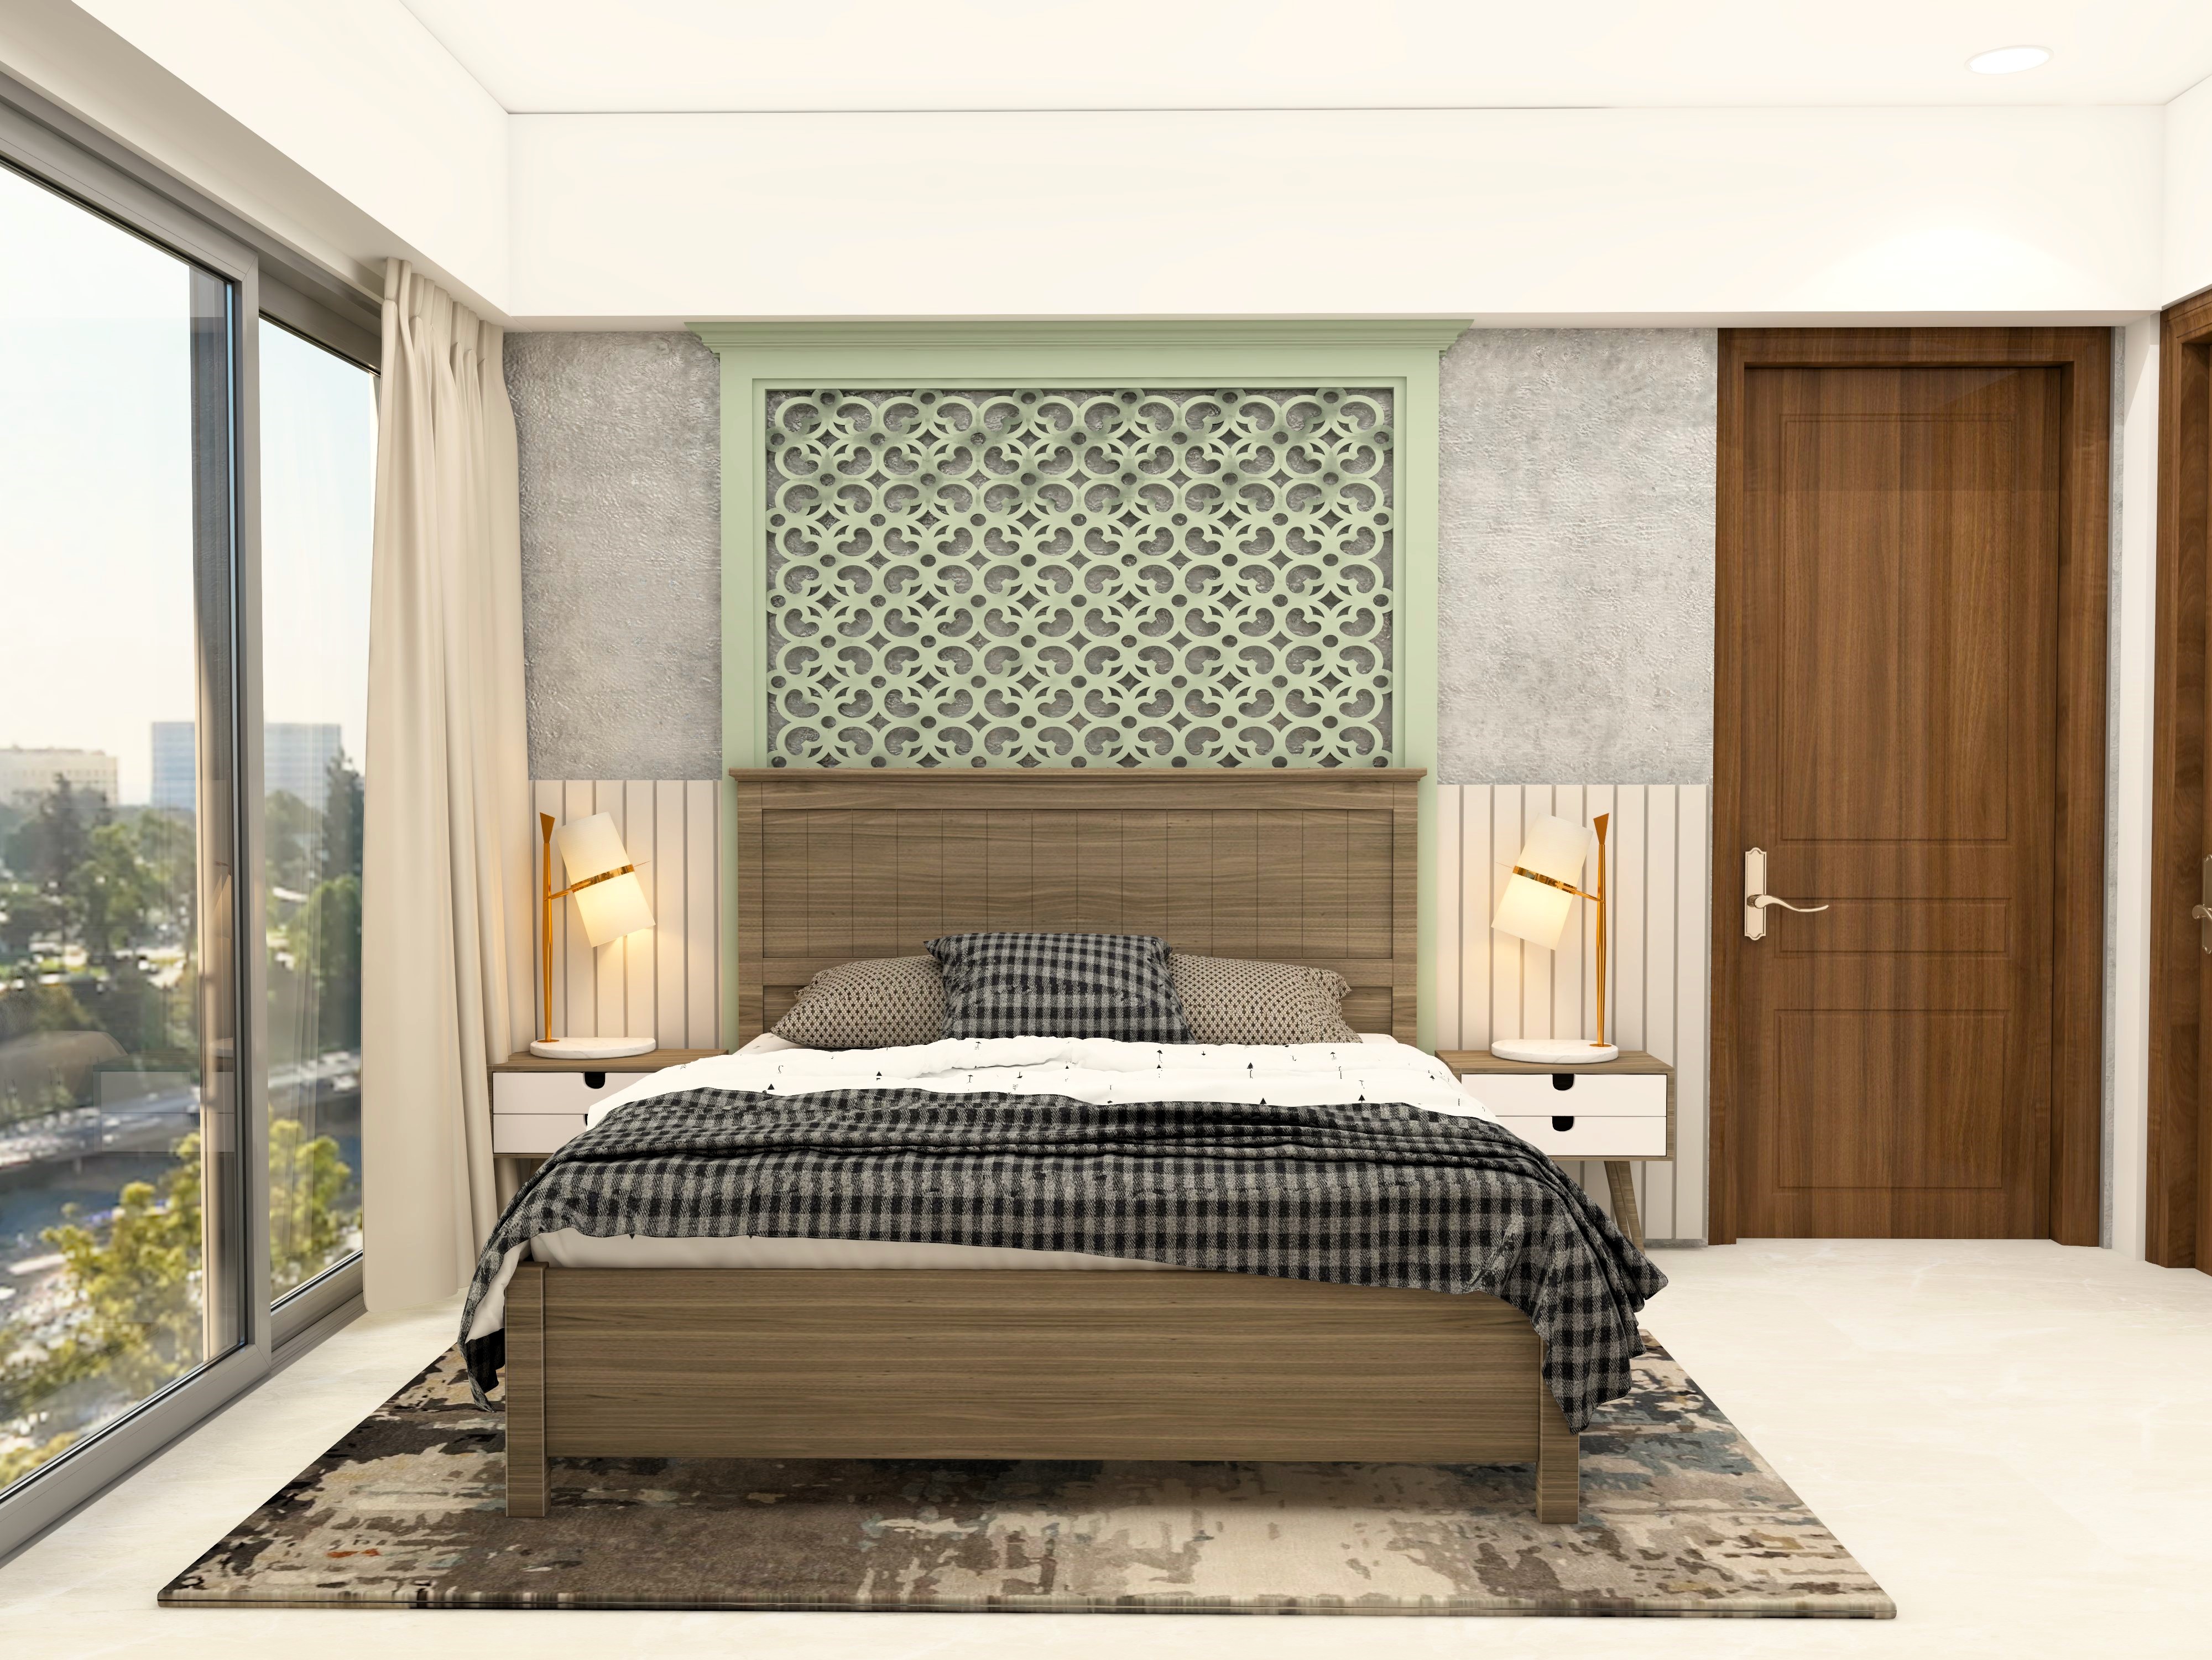 Master bedroom with green CNC cut panel and wooden bed - Beautiful Homes